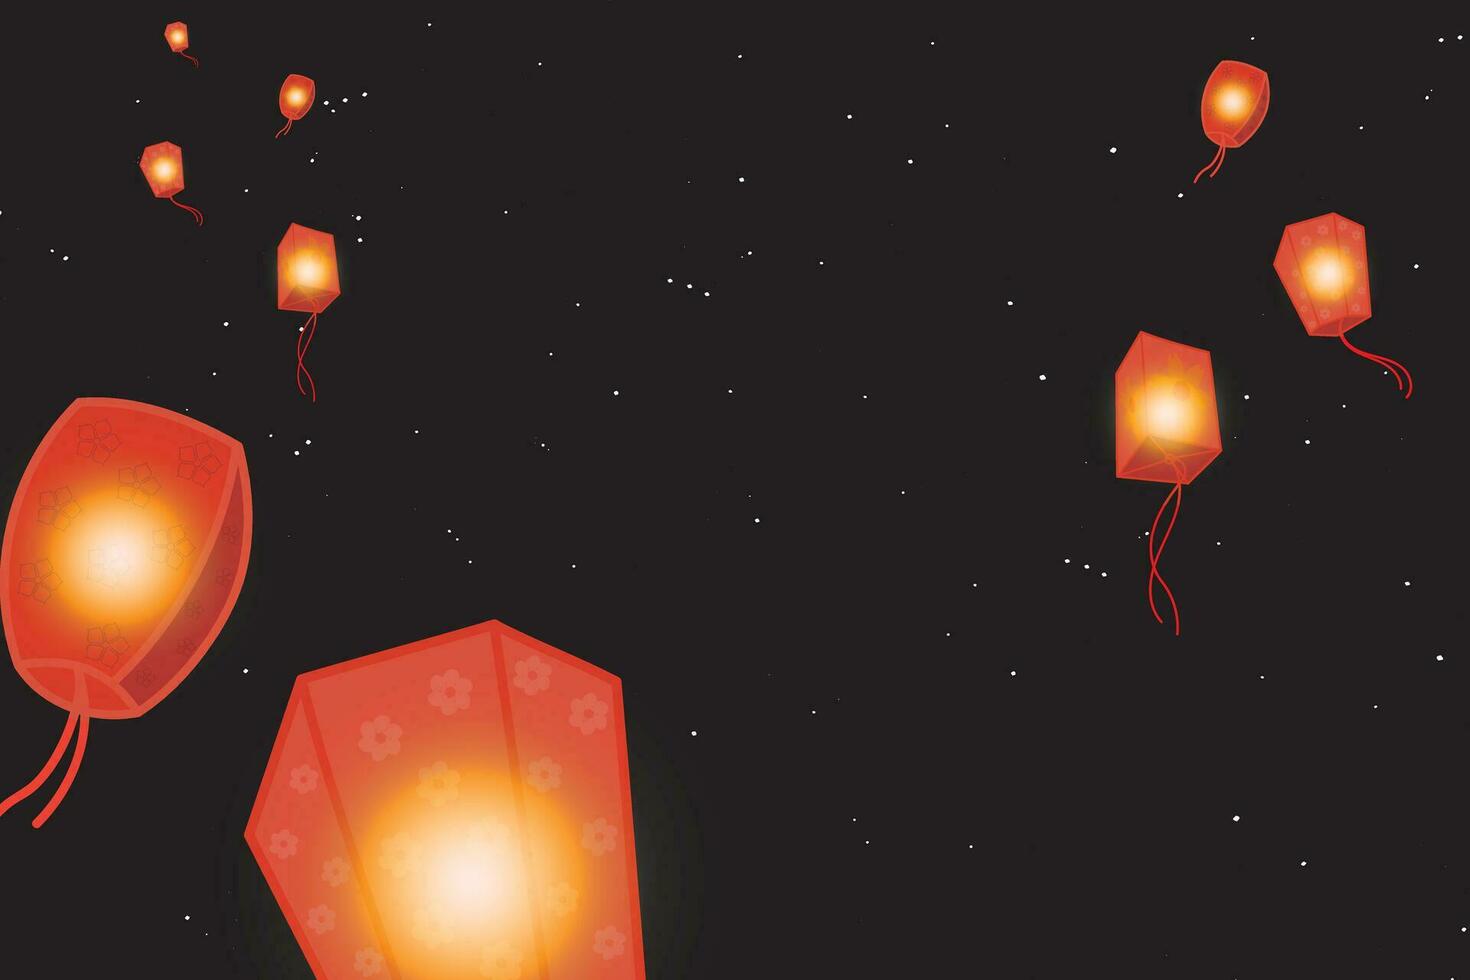 Illustration, Chinese lantern on night sky with star background. vector